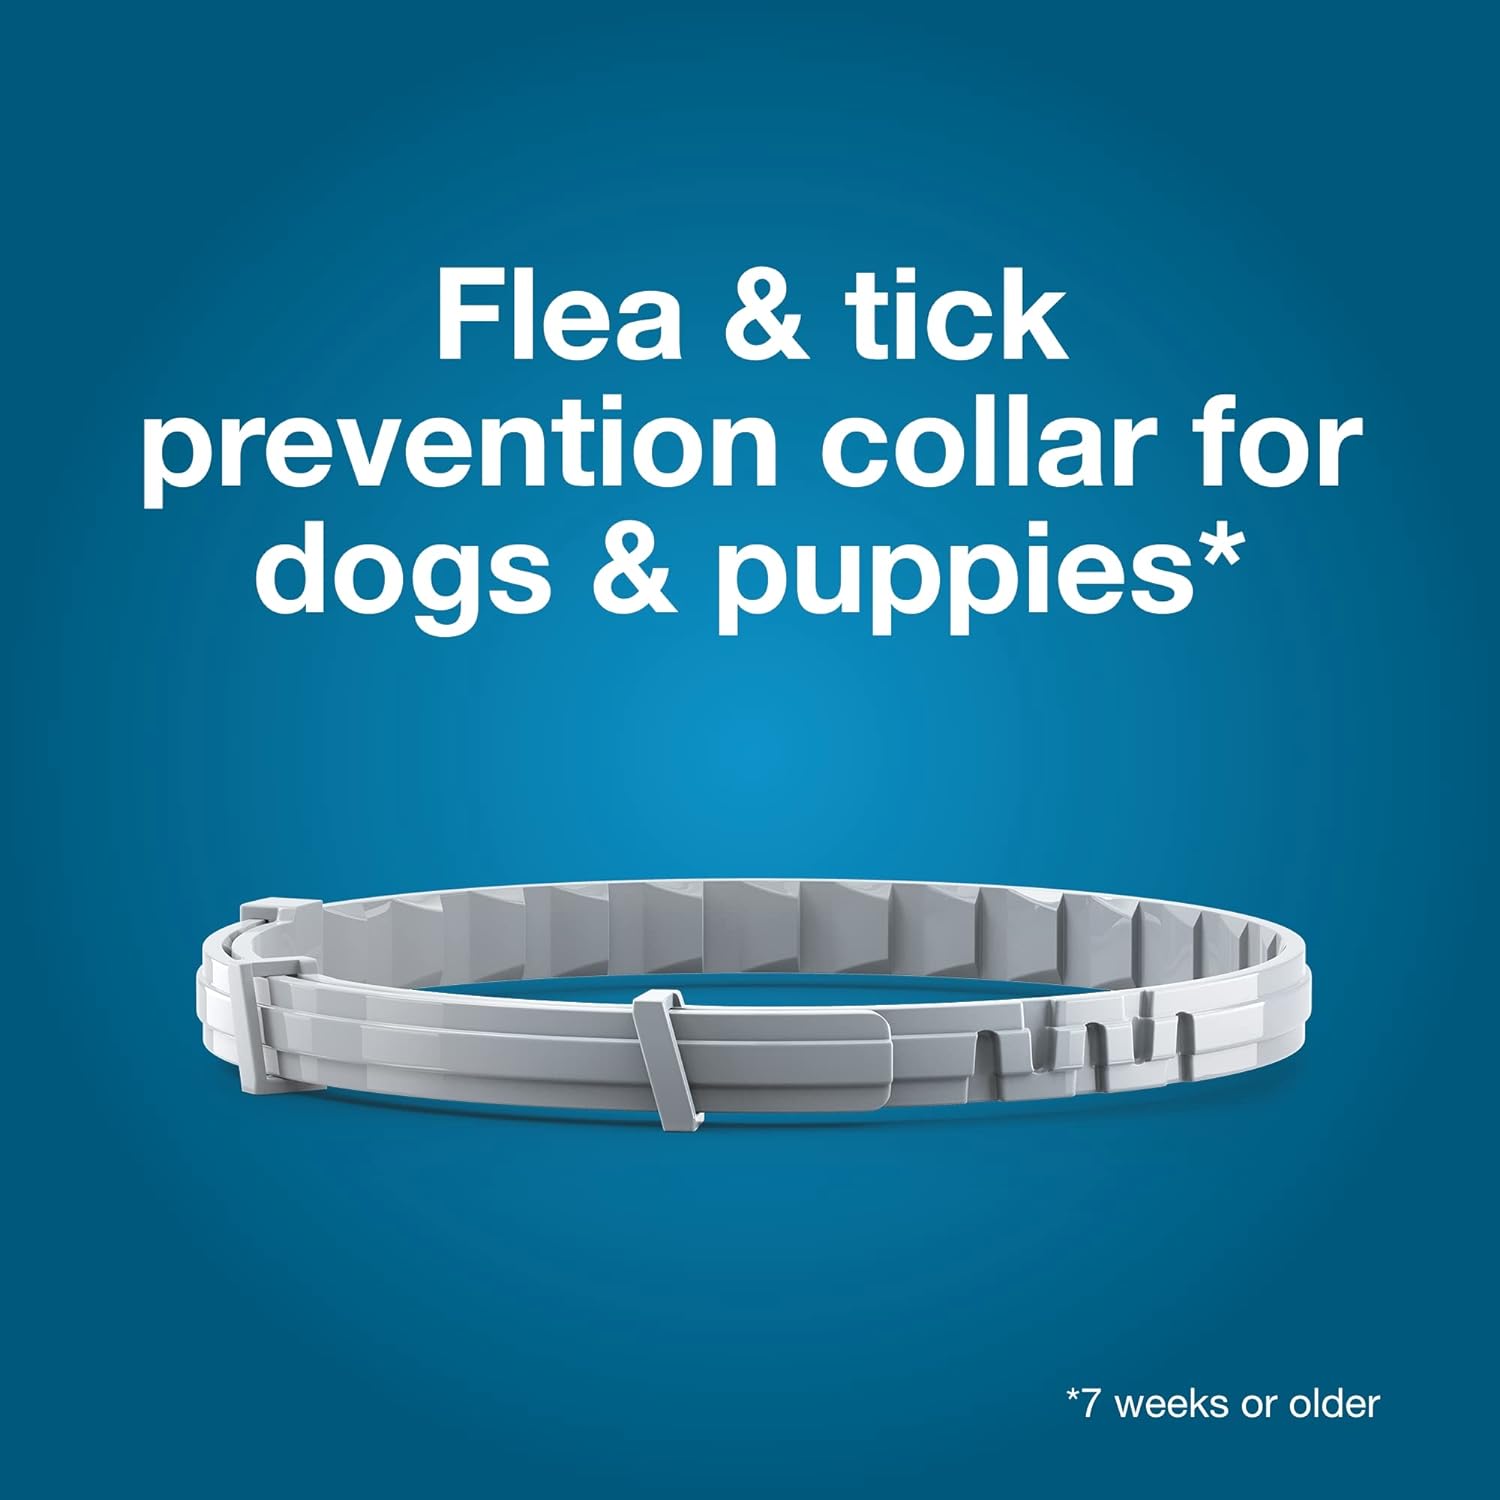 Large Dog Flea & Tick Collar - Vet-Recommended, 8 Months Protection